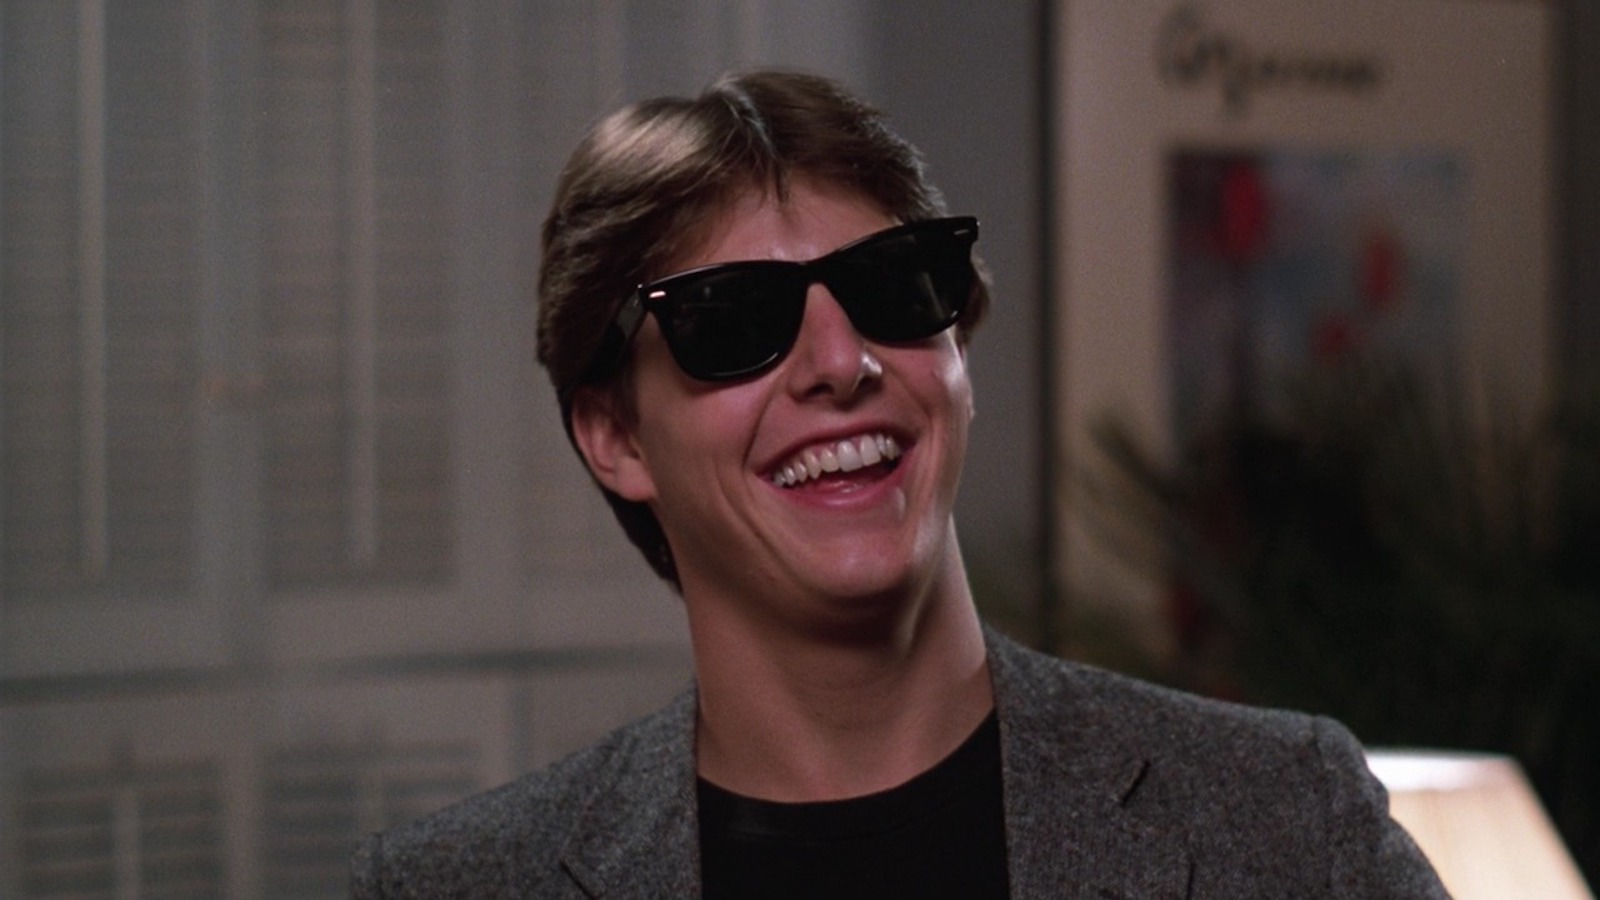 Tom Cruise in Risky Business (1983) from Warner Bros.